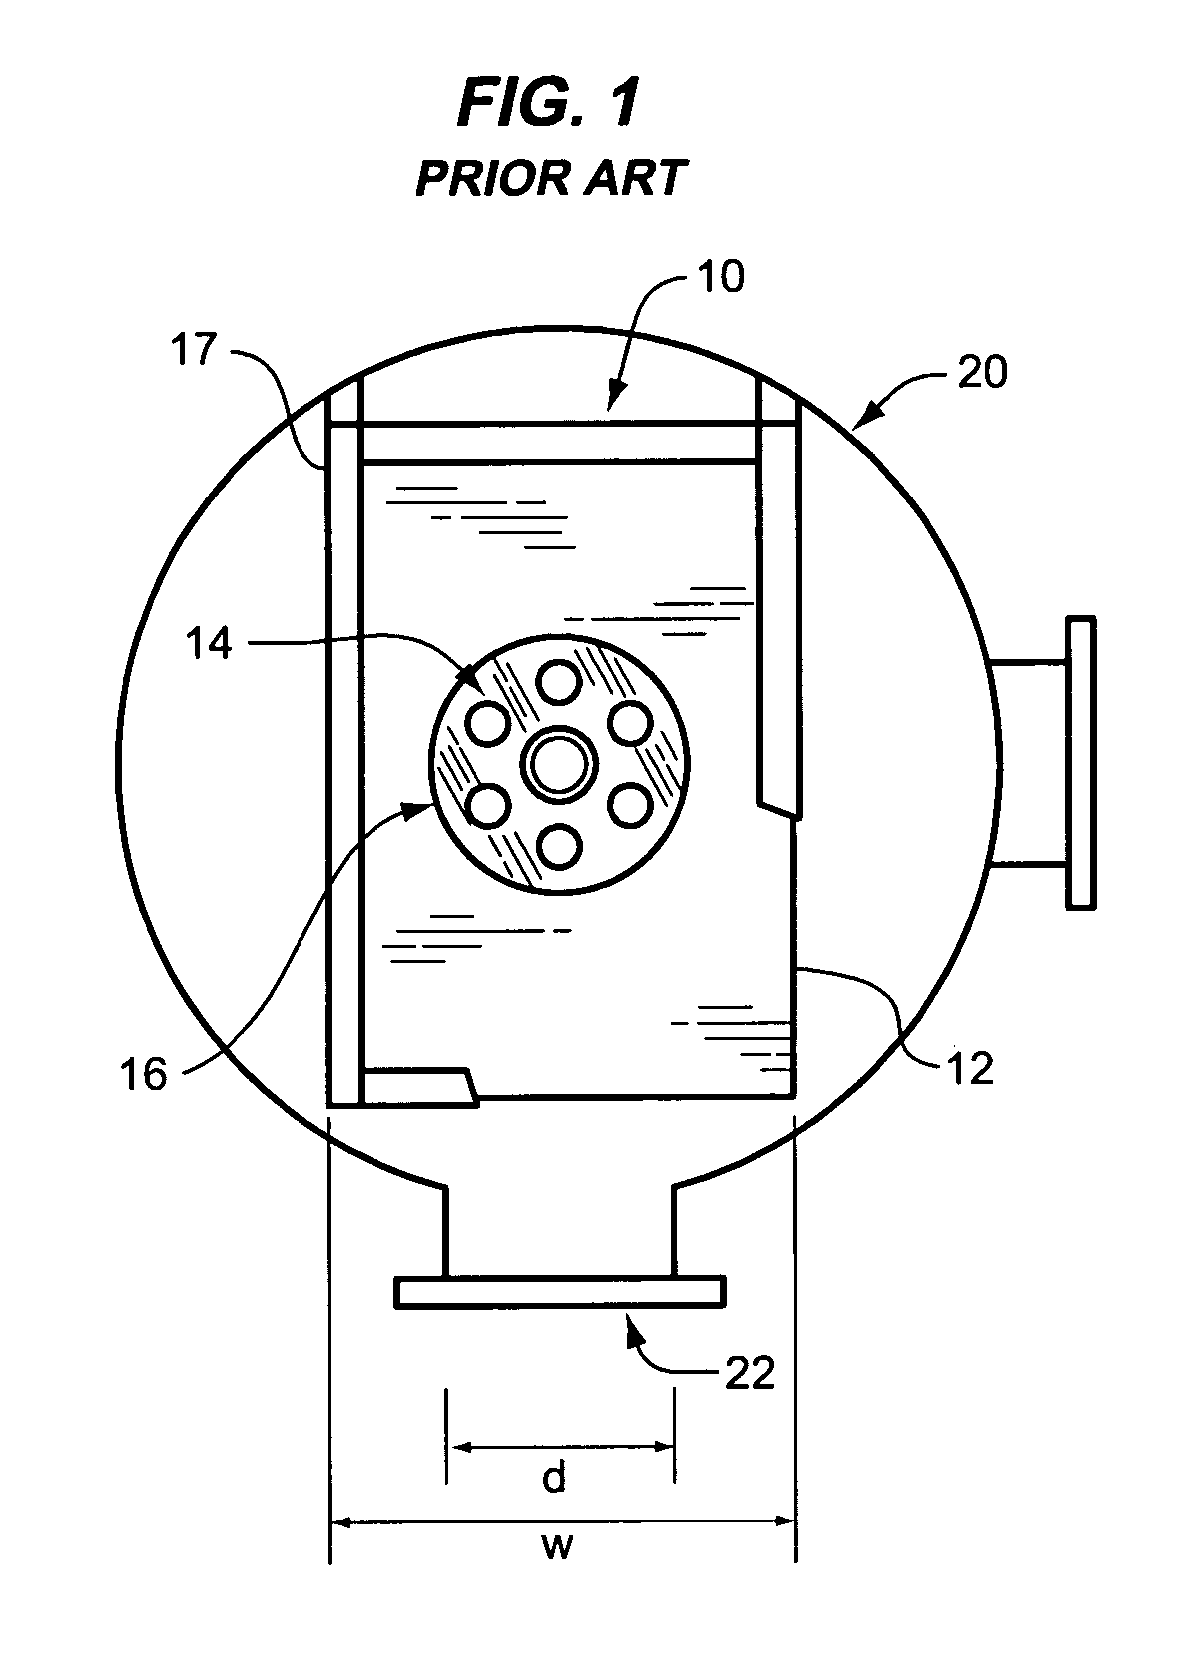 Segmented plate for assembly within a confined area having limited access